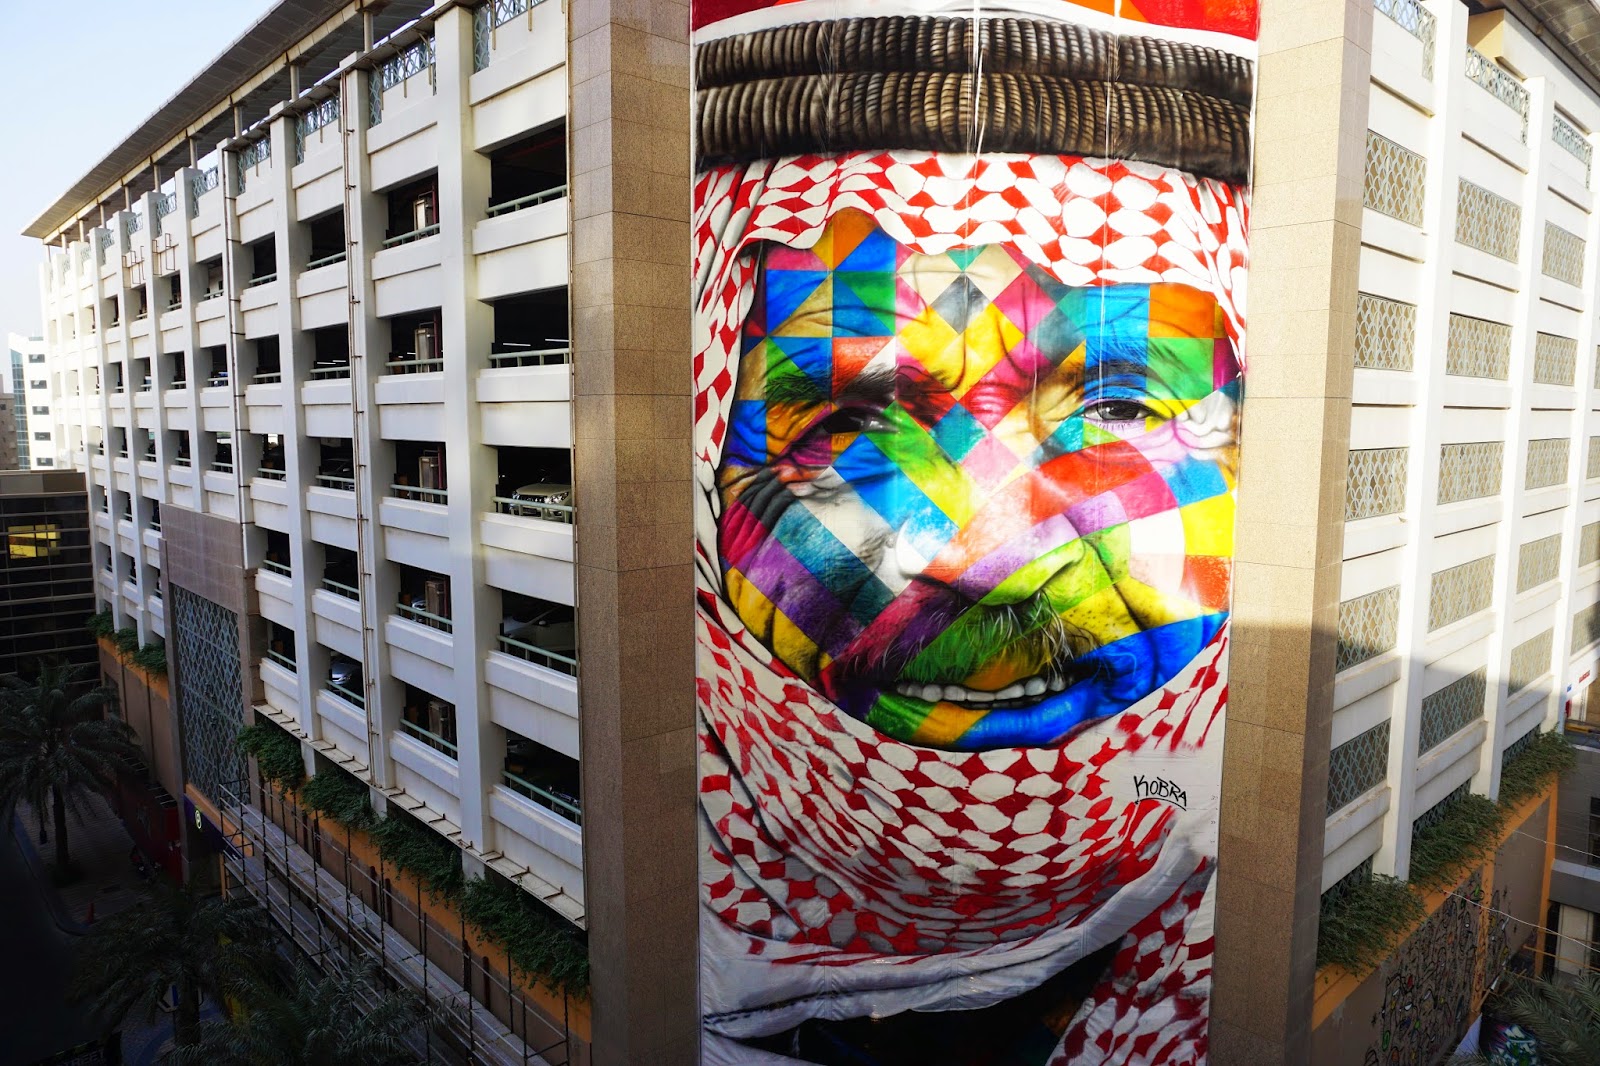 UAE is booming with public art and Edoardo Kobra is the latest artist to bring his artwork to the streets of Dubai.